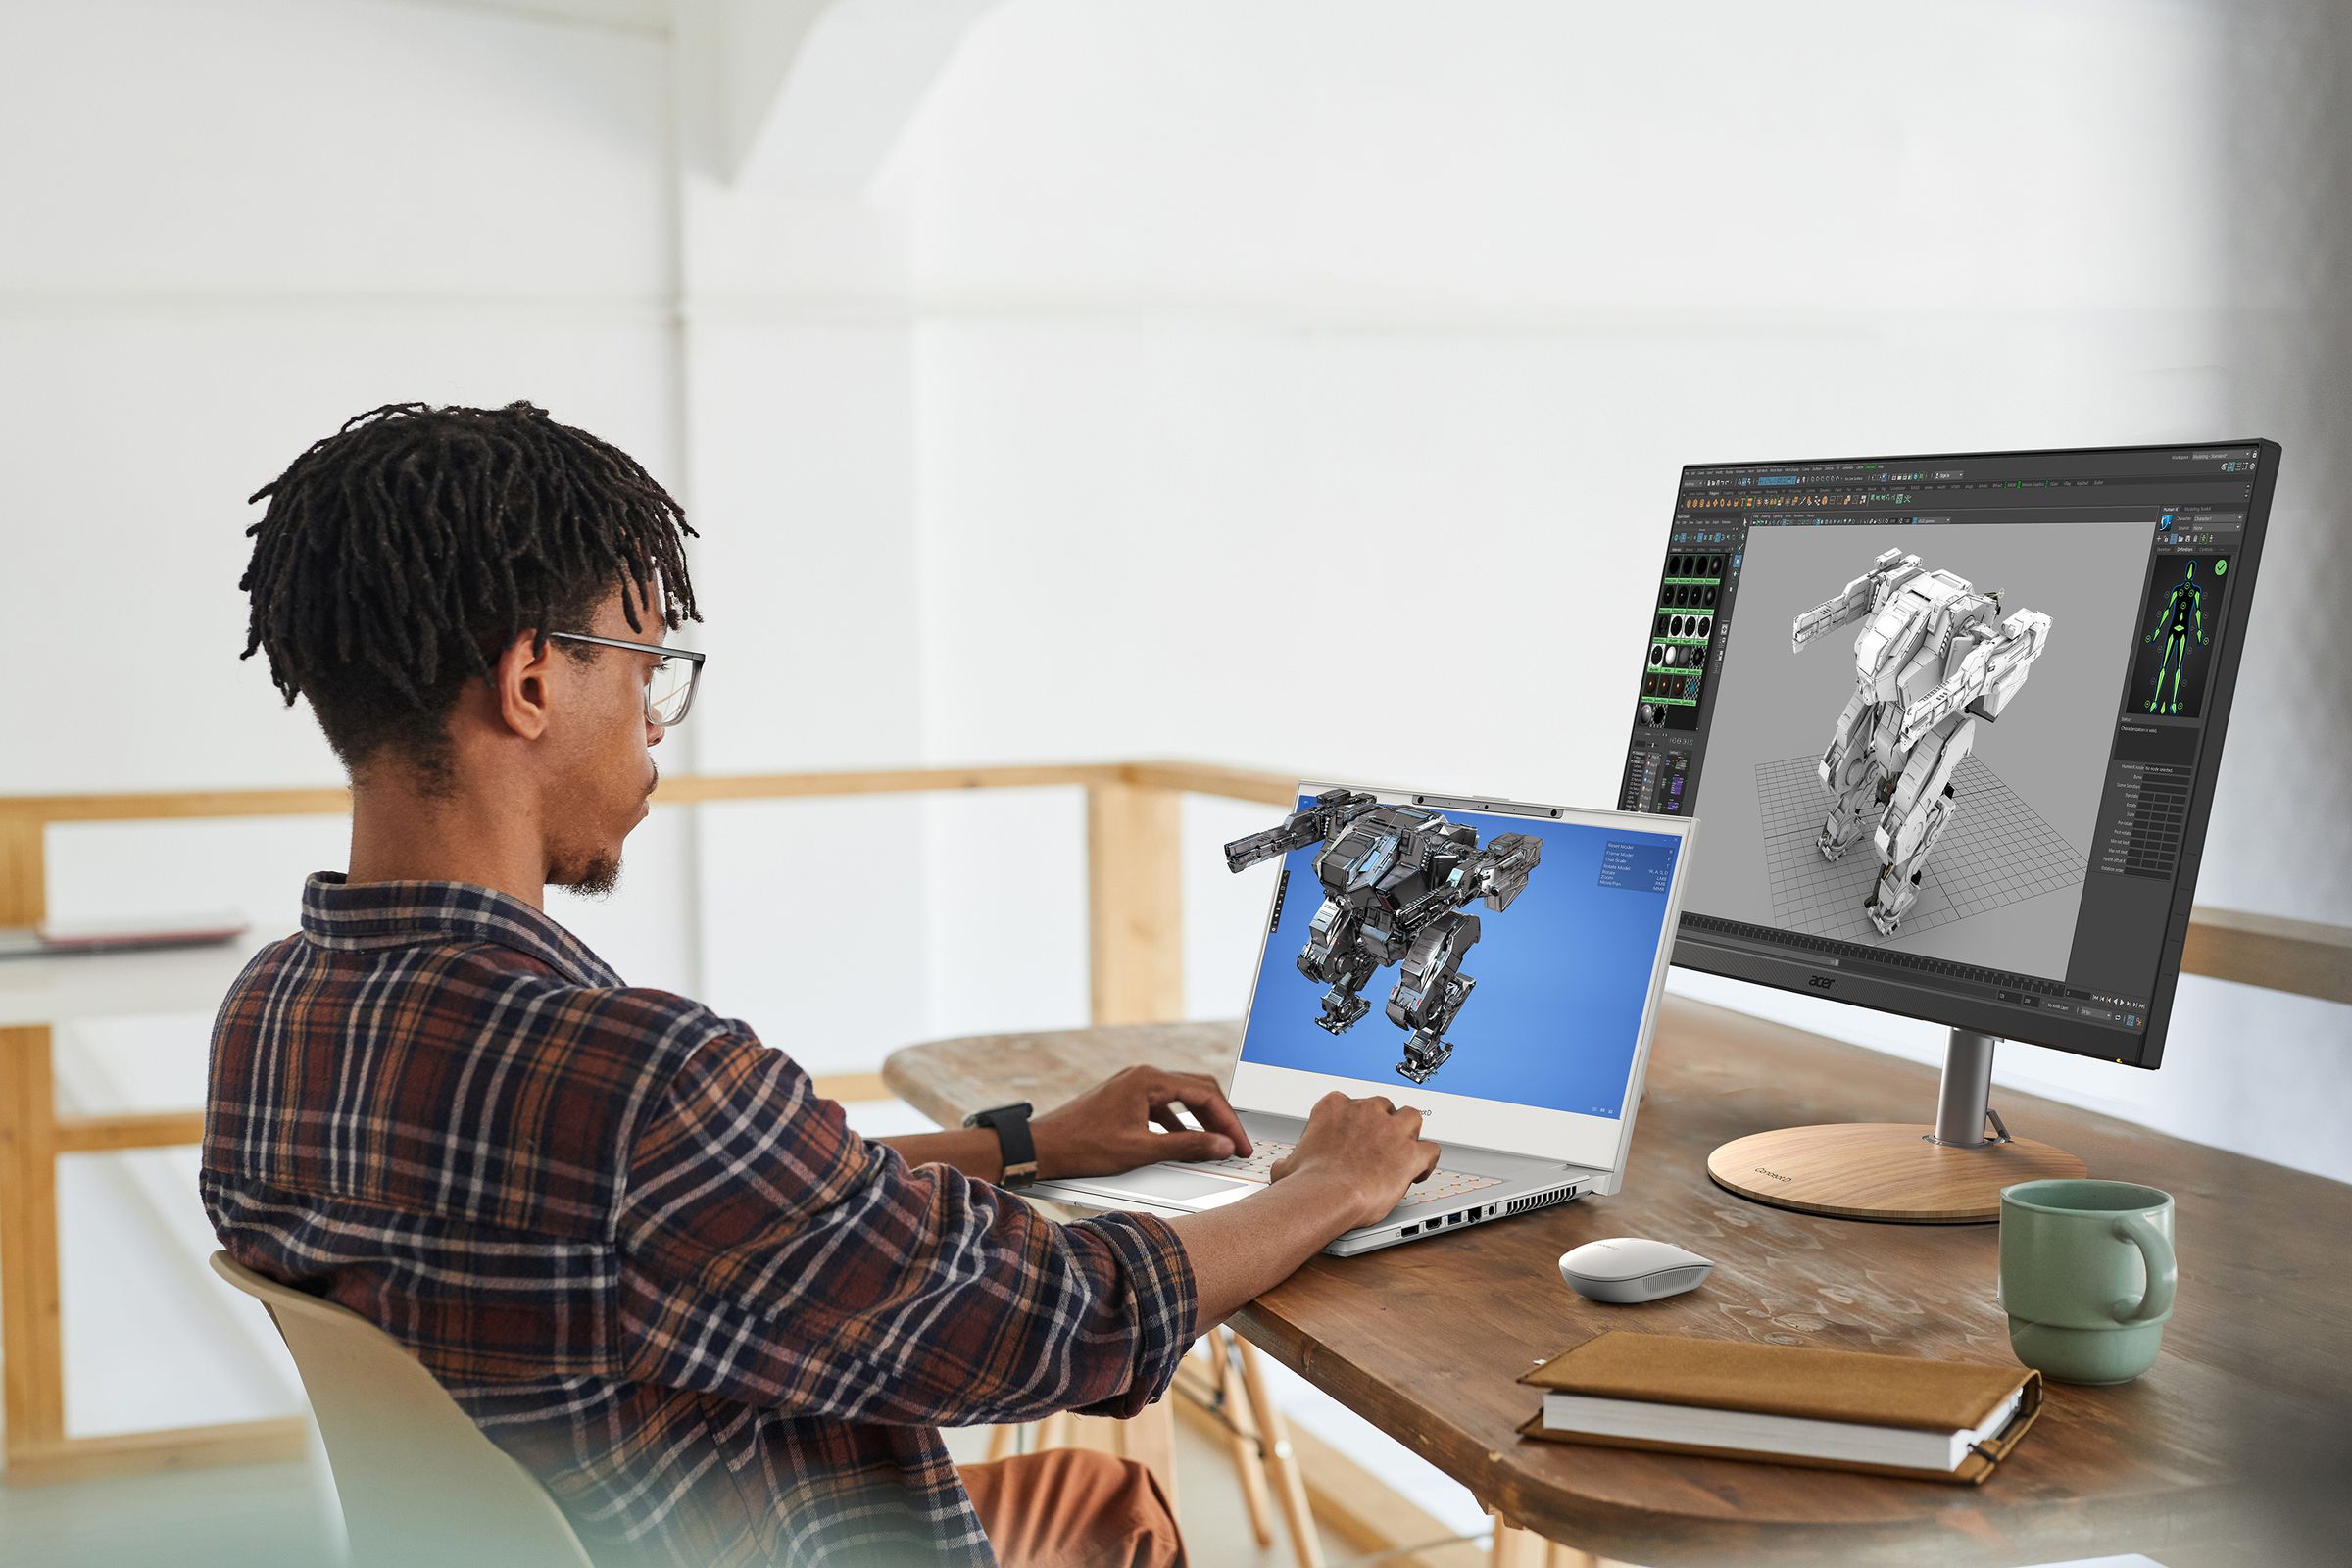 Acer imagines developers using the ConceptD 7 SpatialLabs Edition as a design tool alongside larger displays.